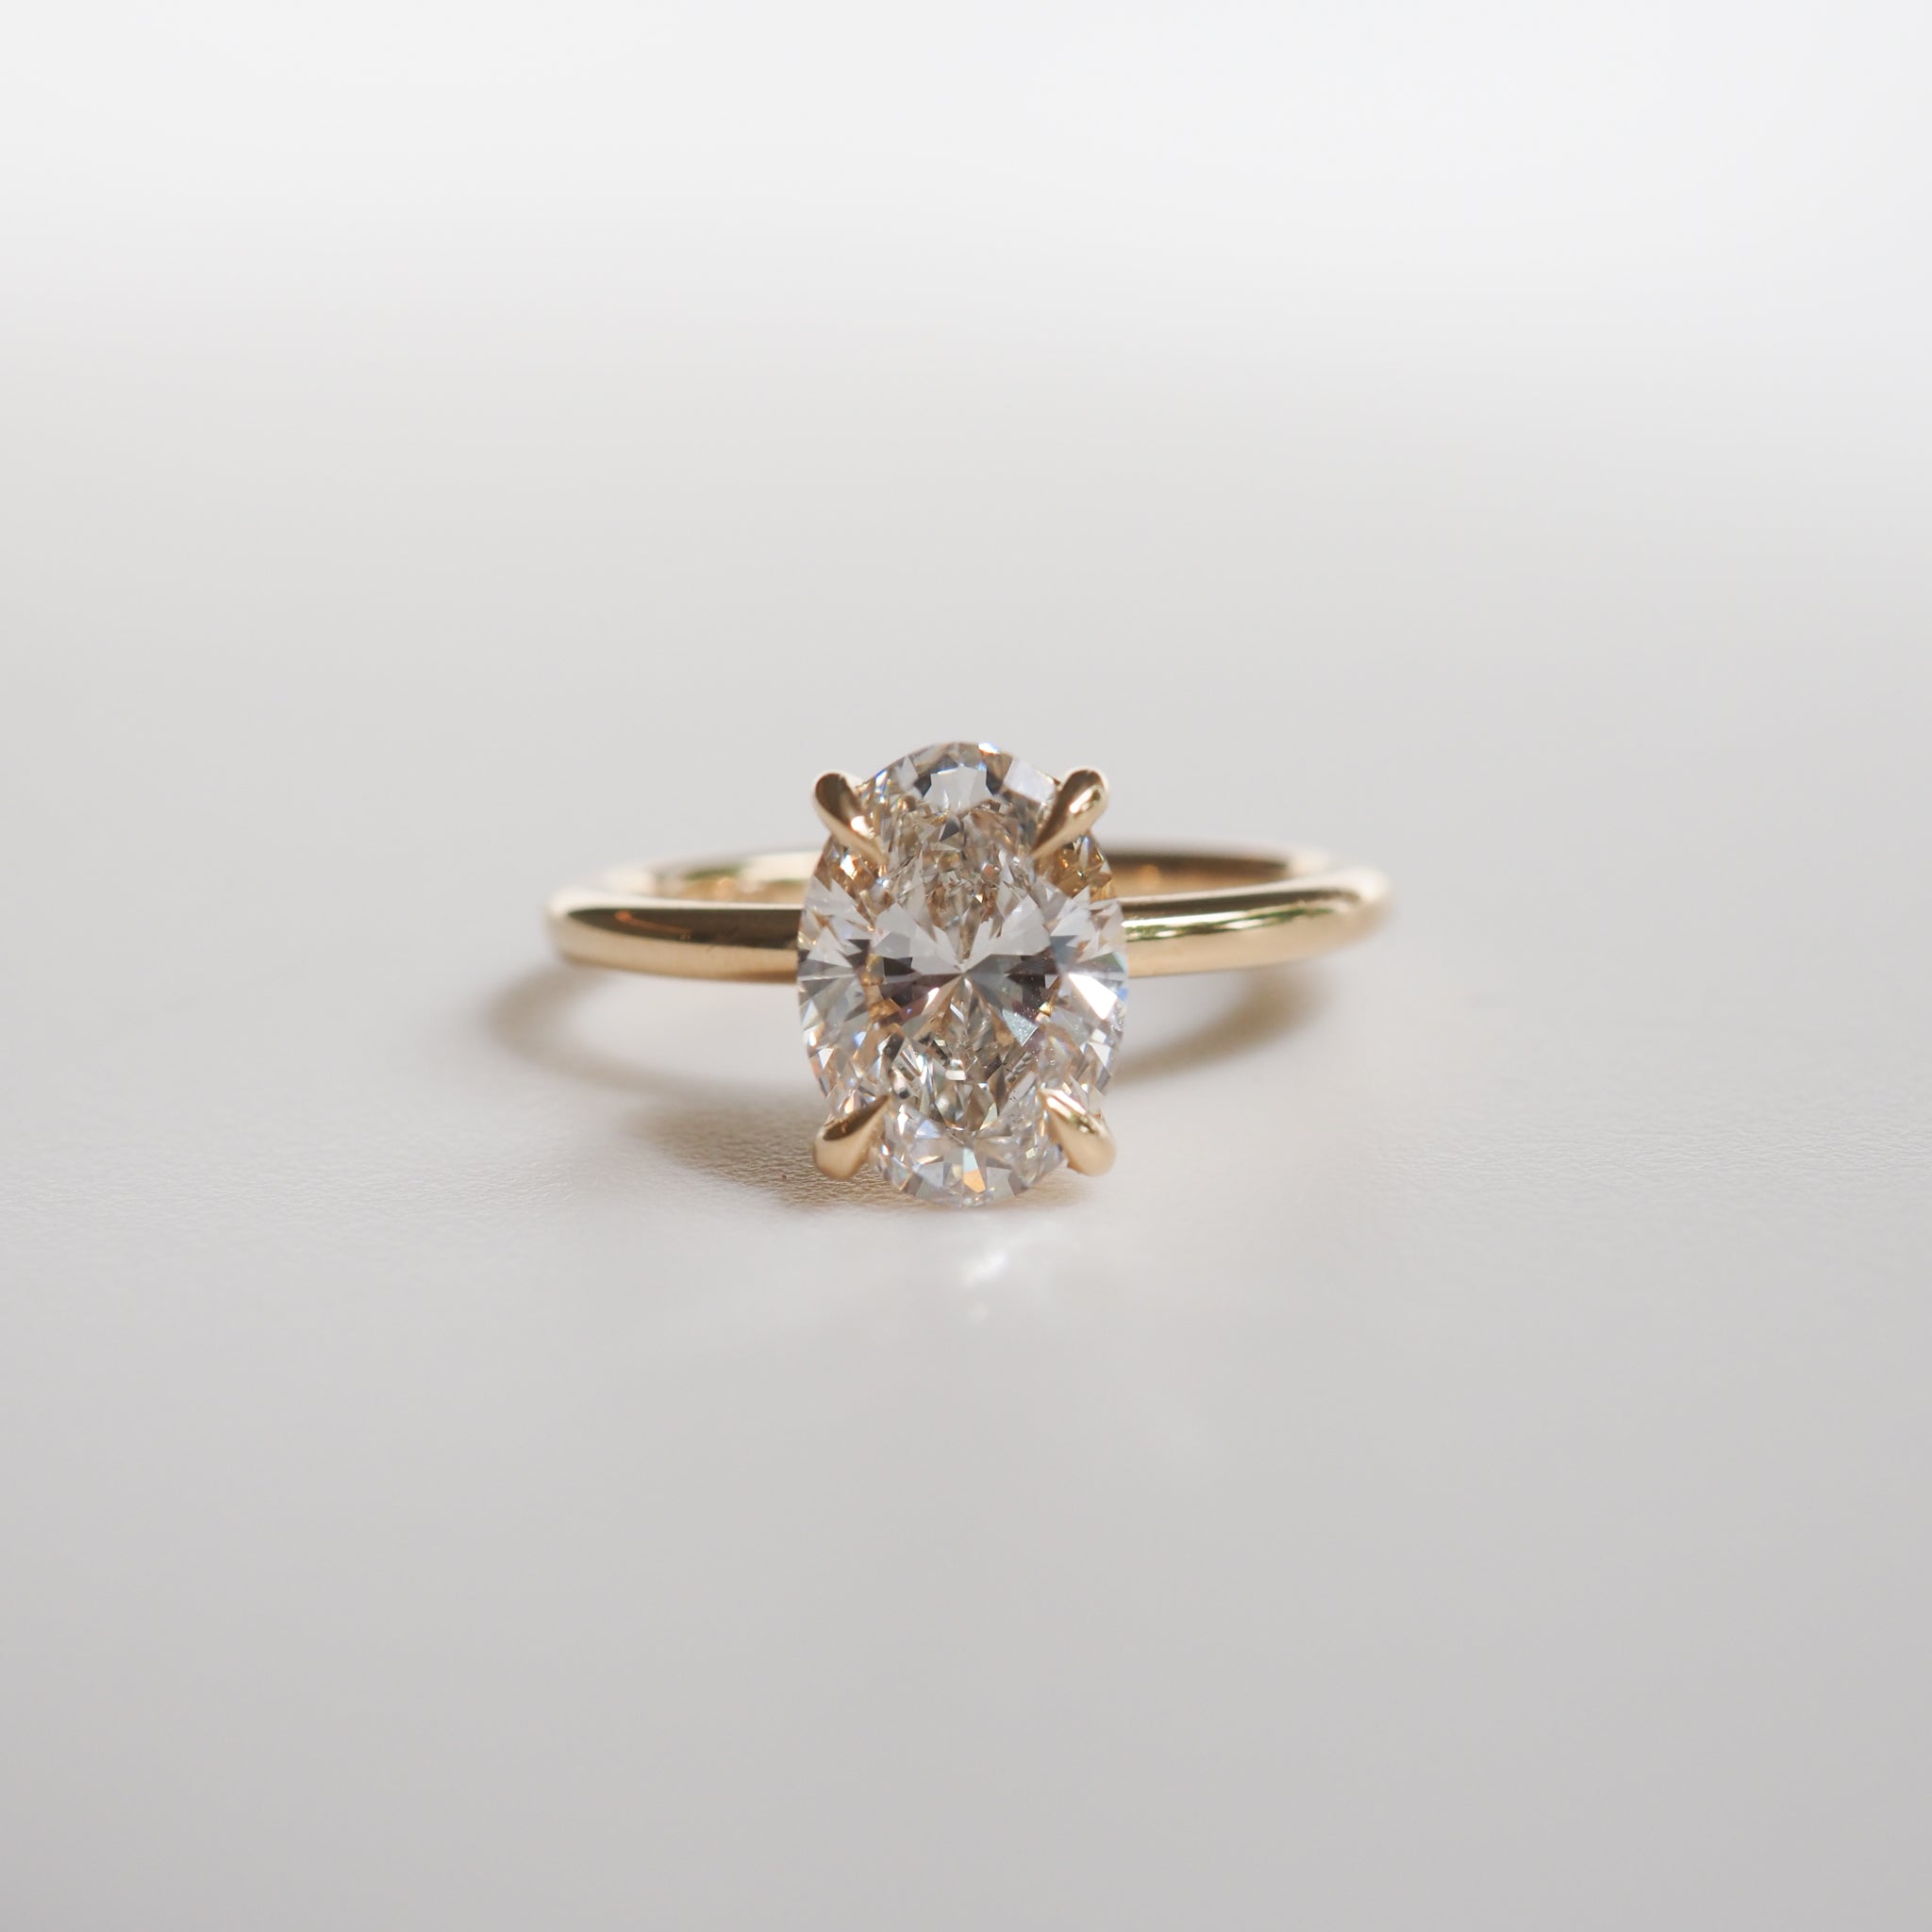 Clara | 1.61ct Oval Diamond Engagement Ring Ready To Wear